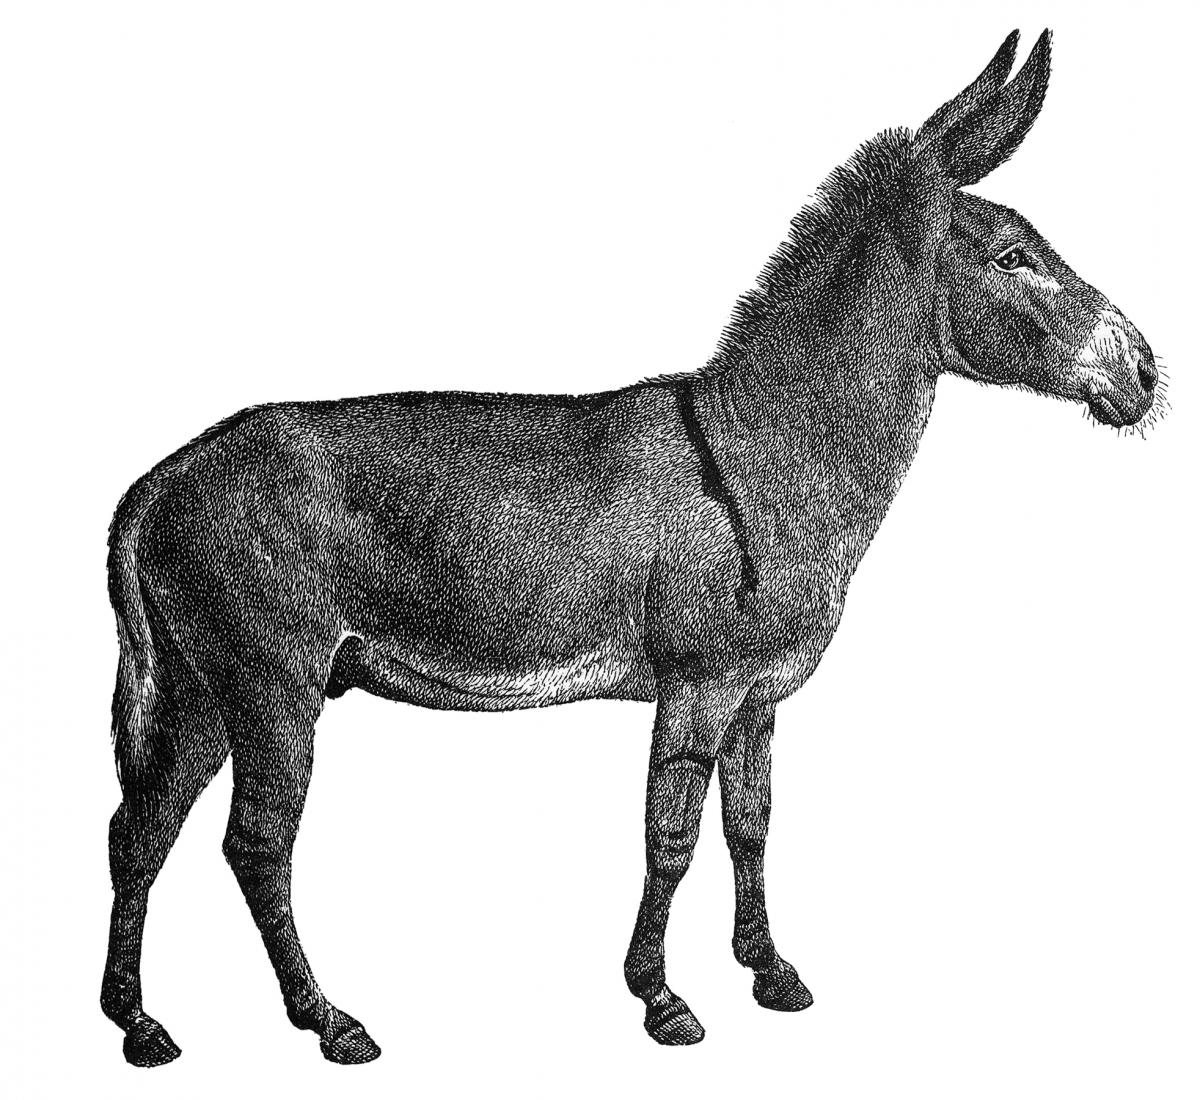 Side view of a gray and white donkey, facing the right